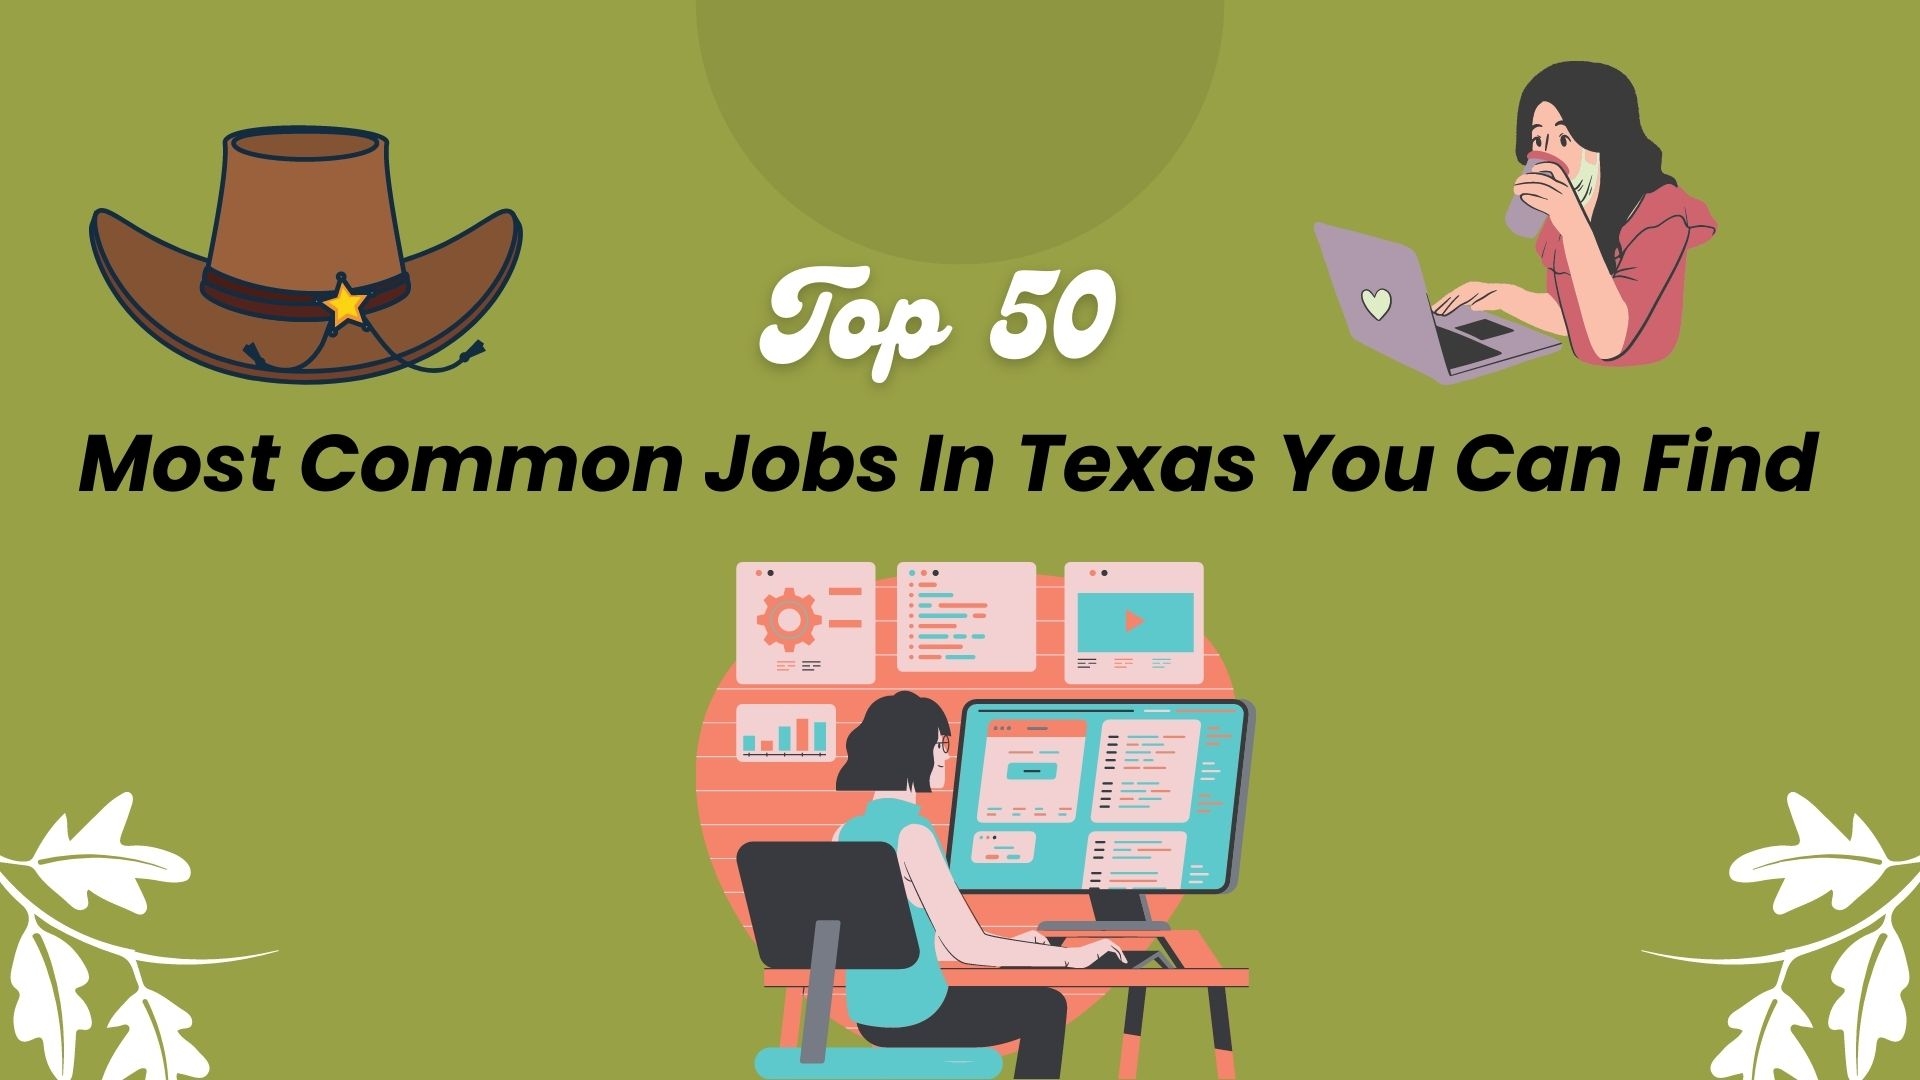 Top 50 Most Popular Jobs and Average Salary In Texas 2023/2024